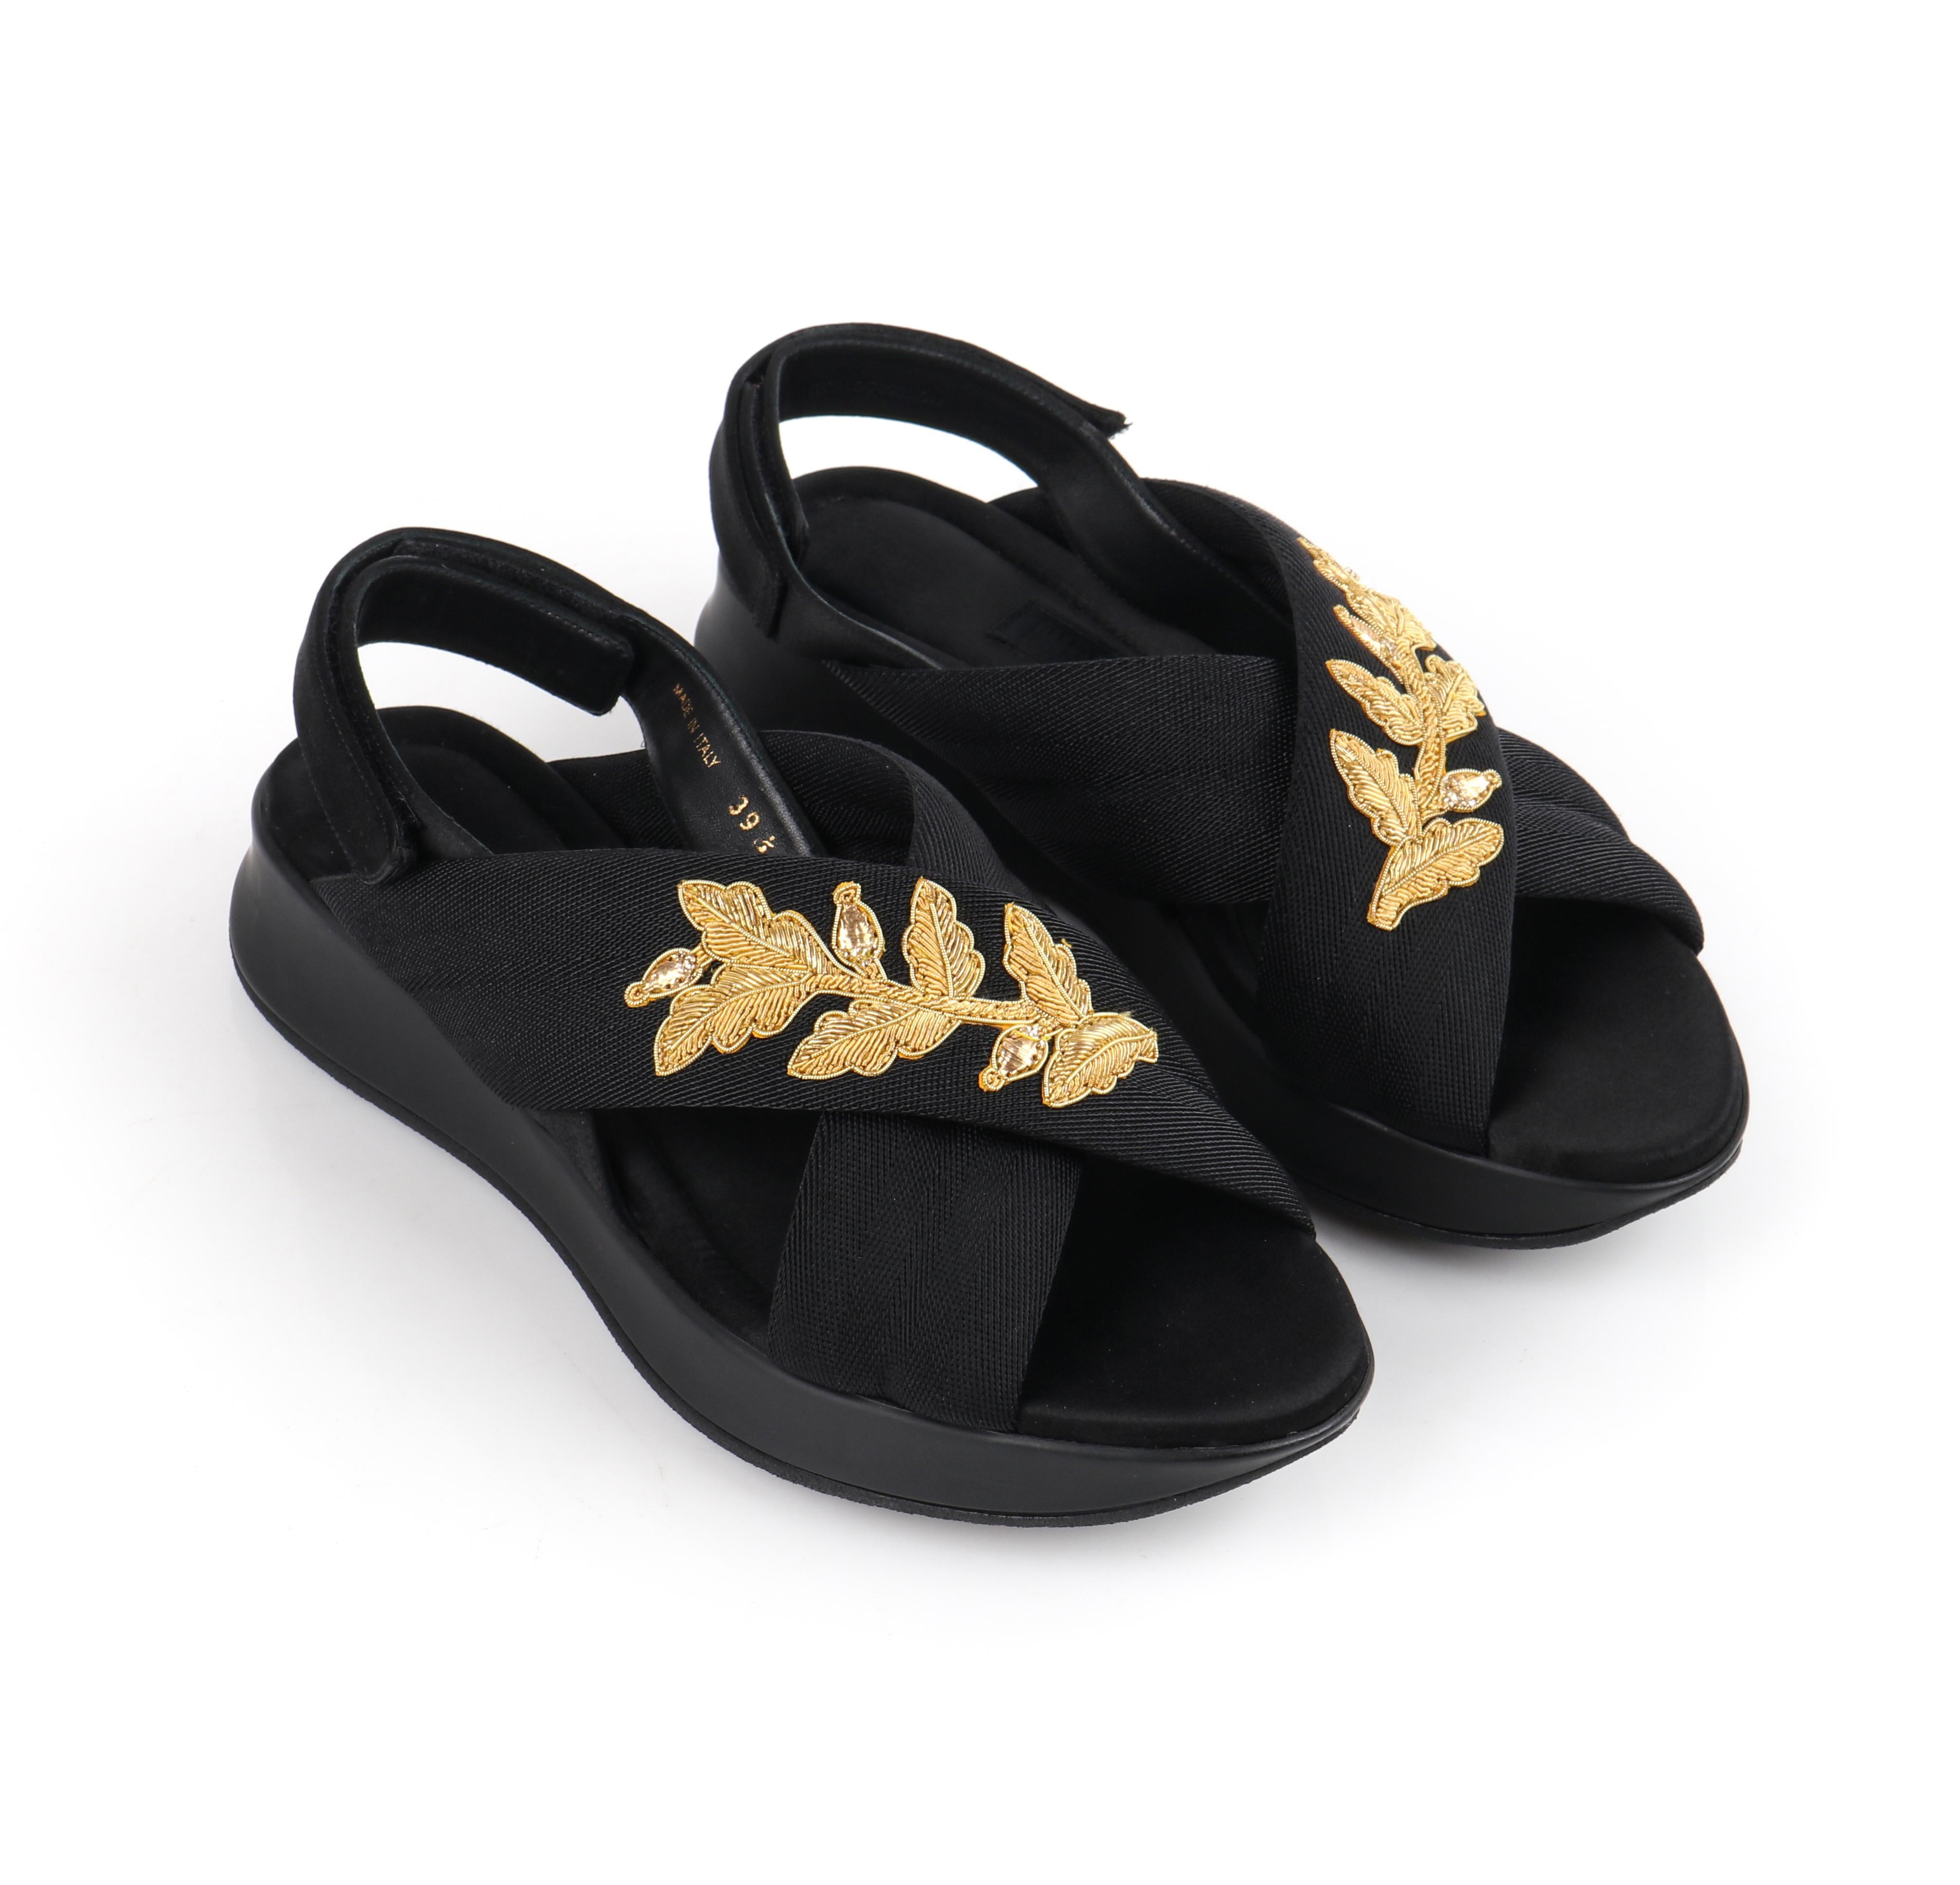 BURBERRY Prorsum S/S 2016 Criss Cross Embroidered Black Gold Adjustable Sandals  For Sale 2